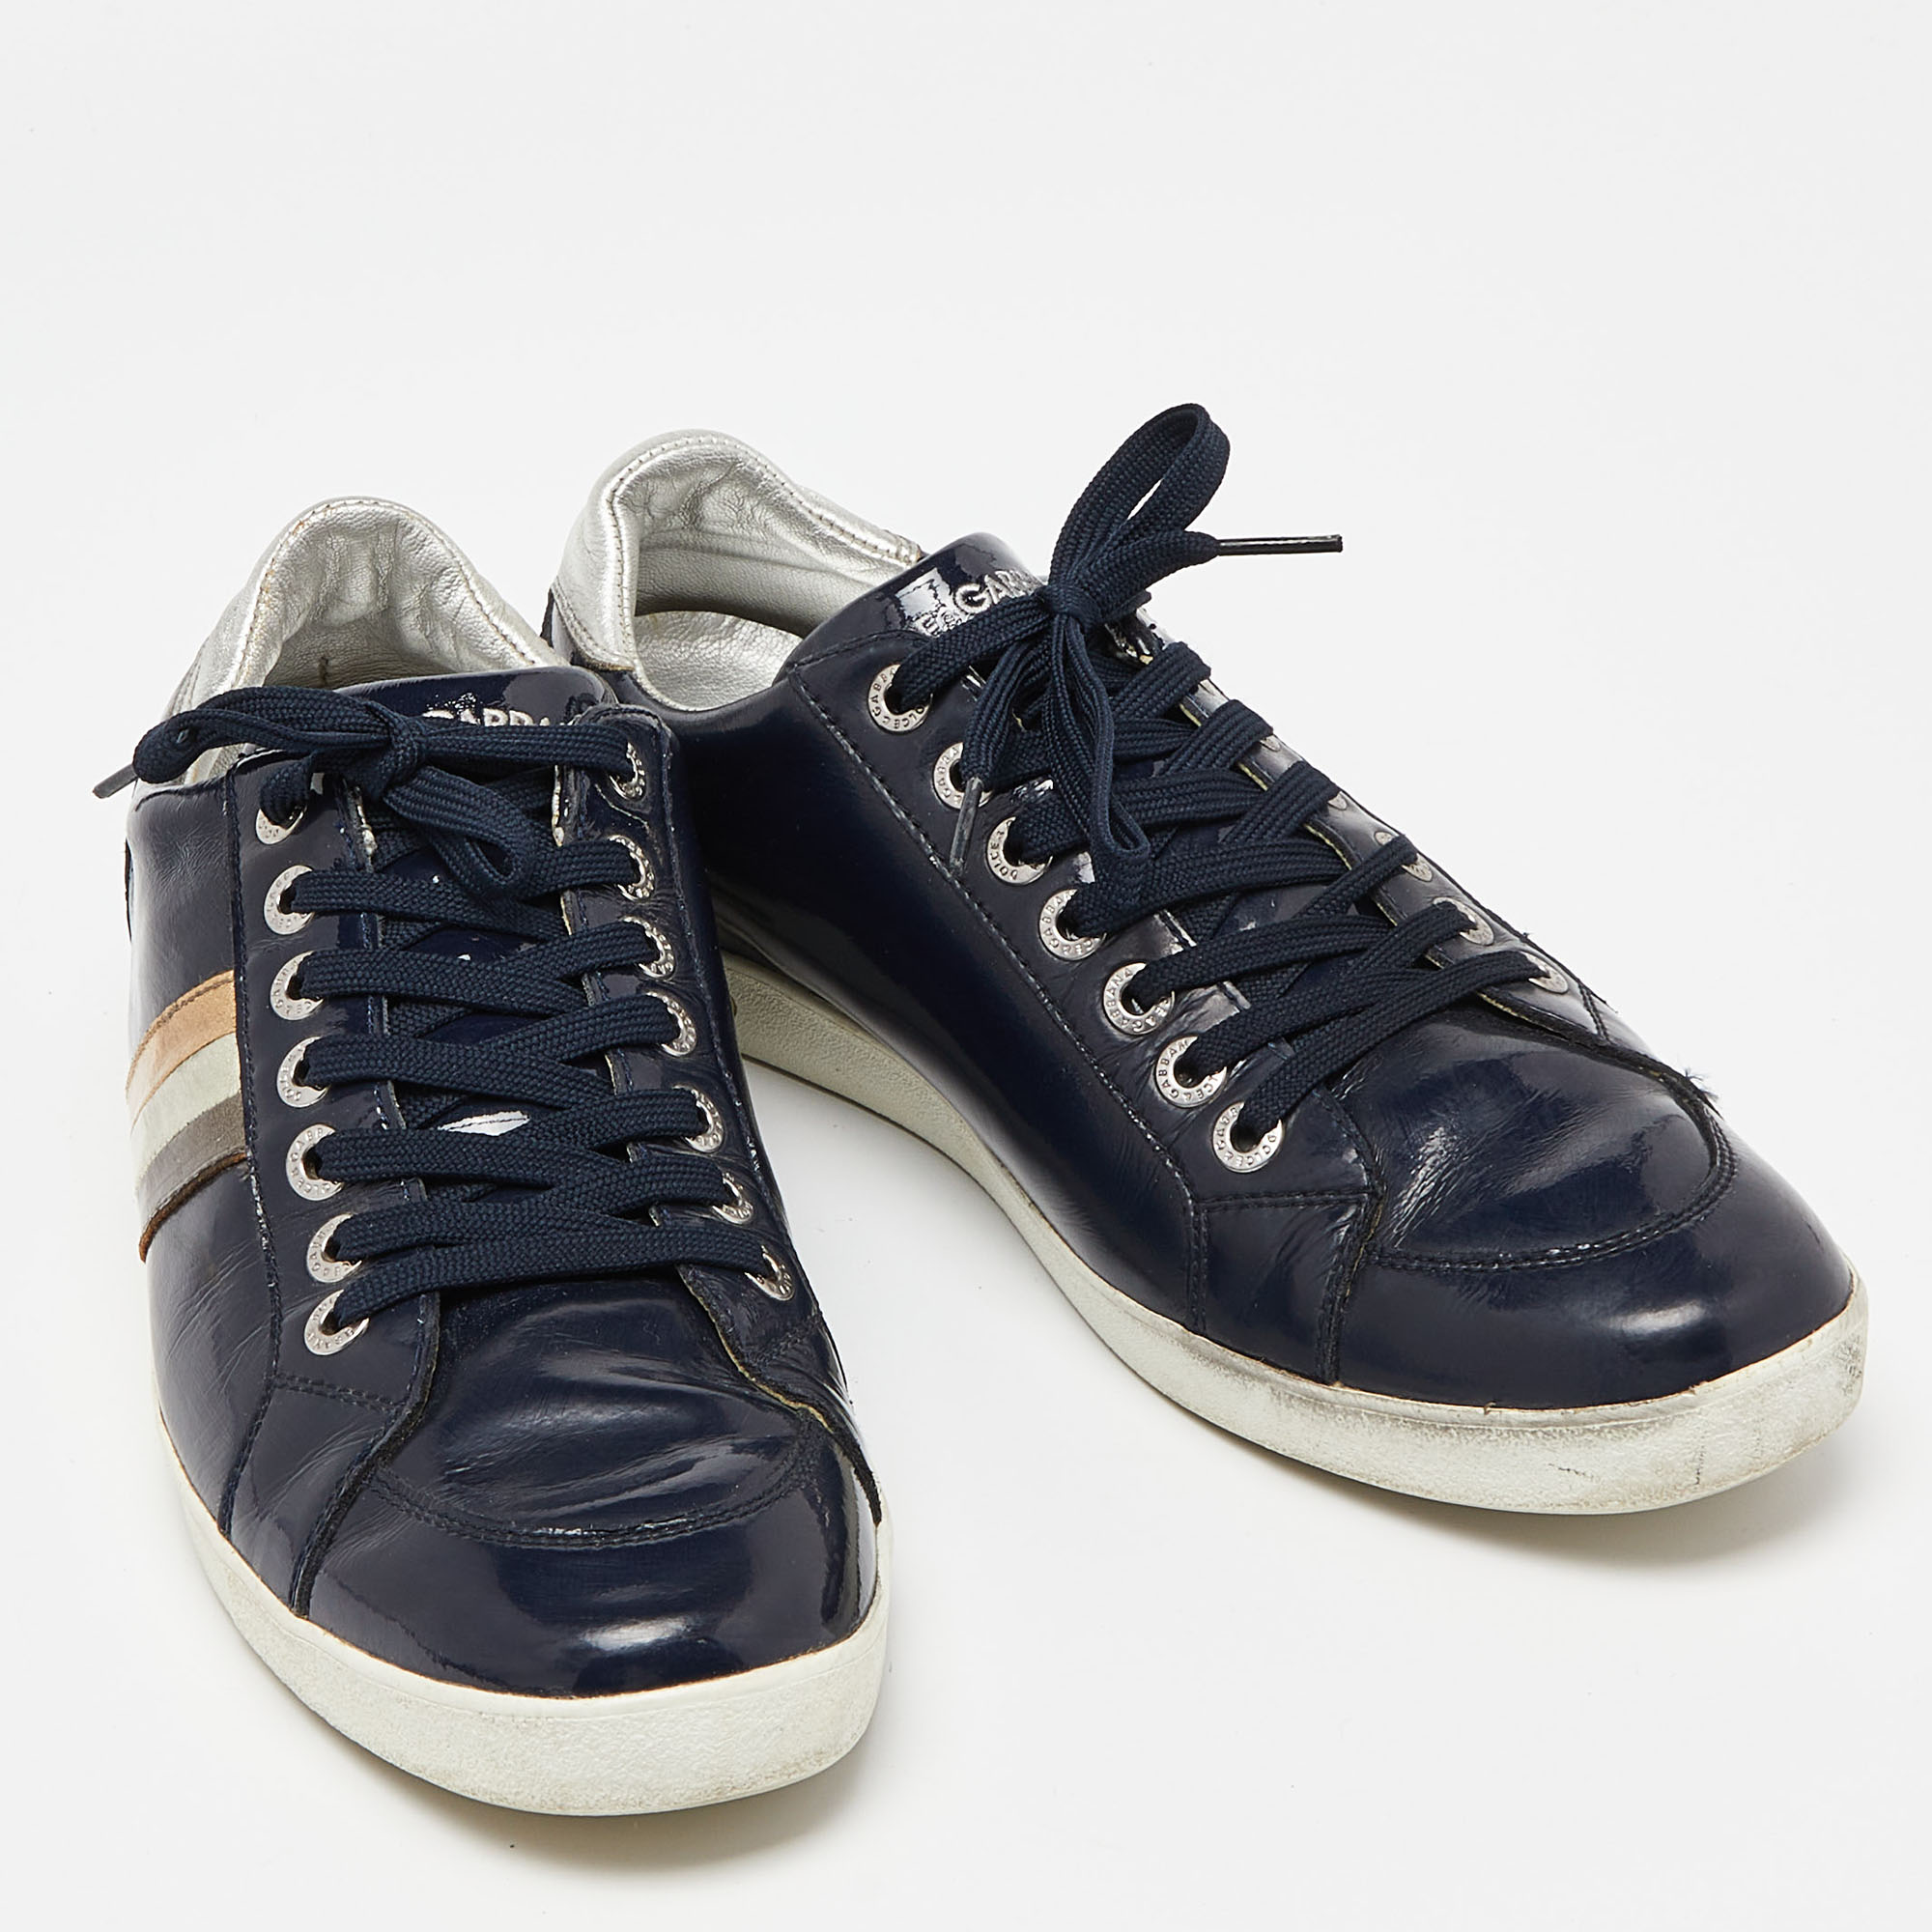 Dolce & Gabbana Navy Blue/Silver Patent Leather Low Top Sneakers Size 43